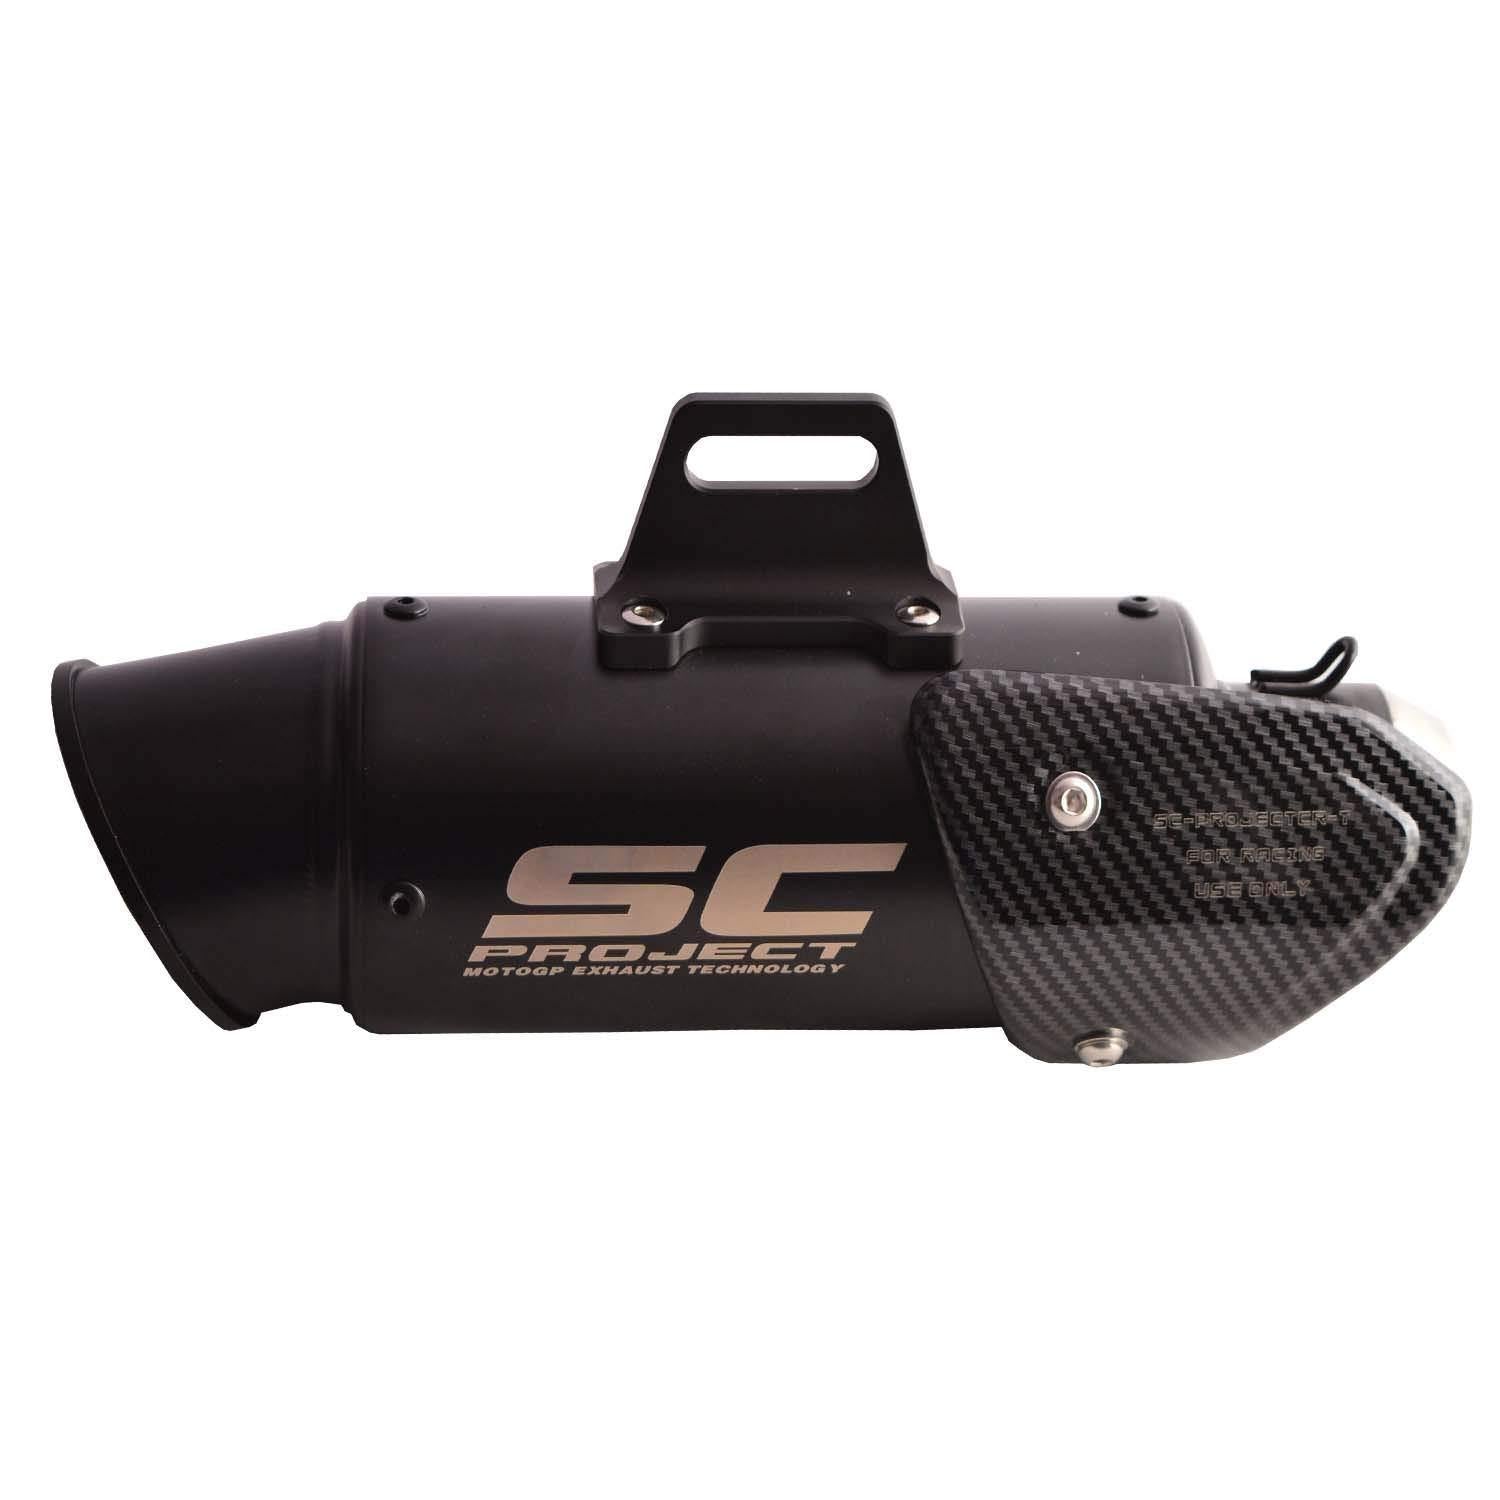 Conic with Body cover Black - Premium Exhausts from Sparewick - Just Rs. 2800! Shop now at Sparewick